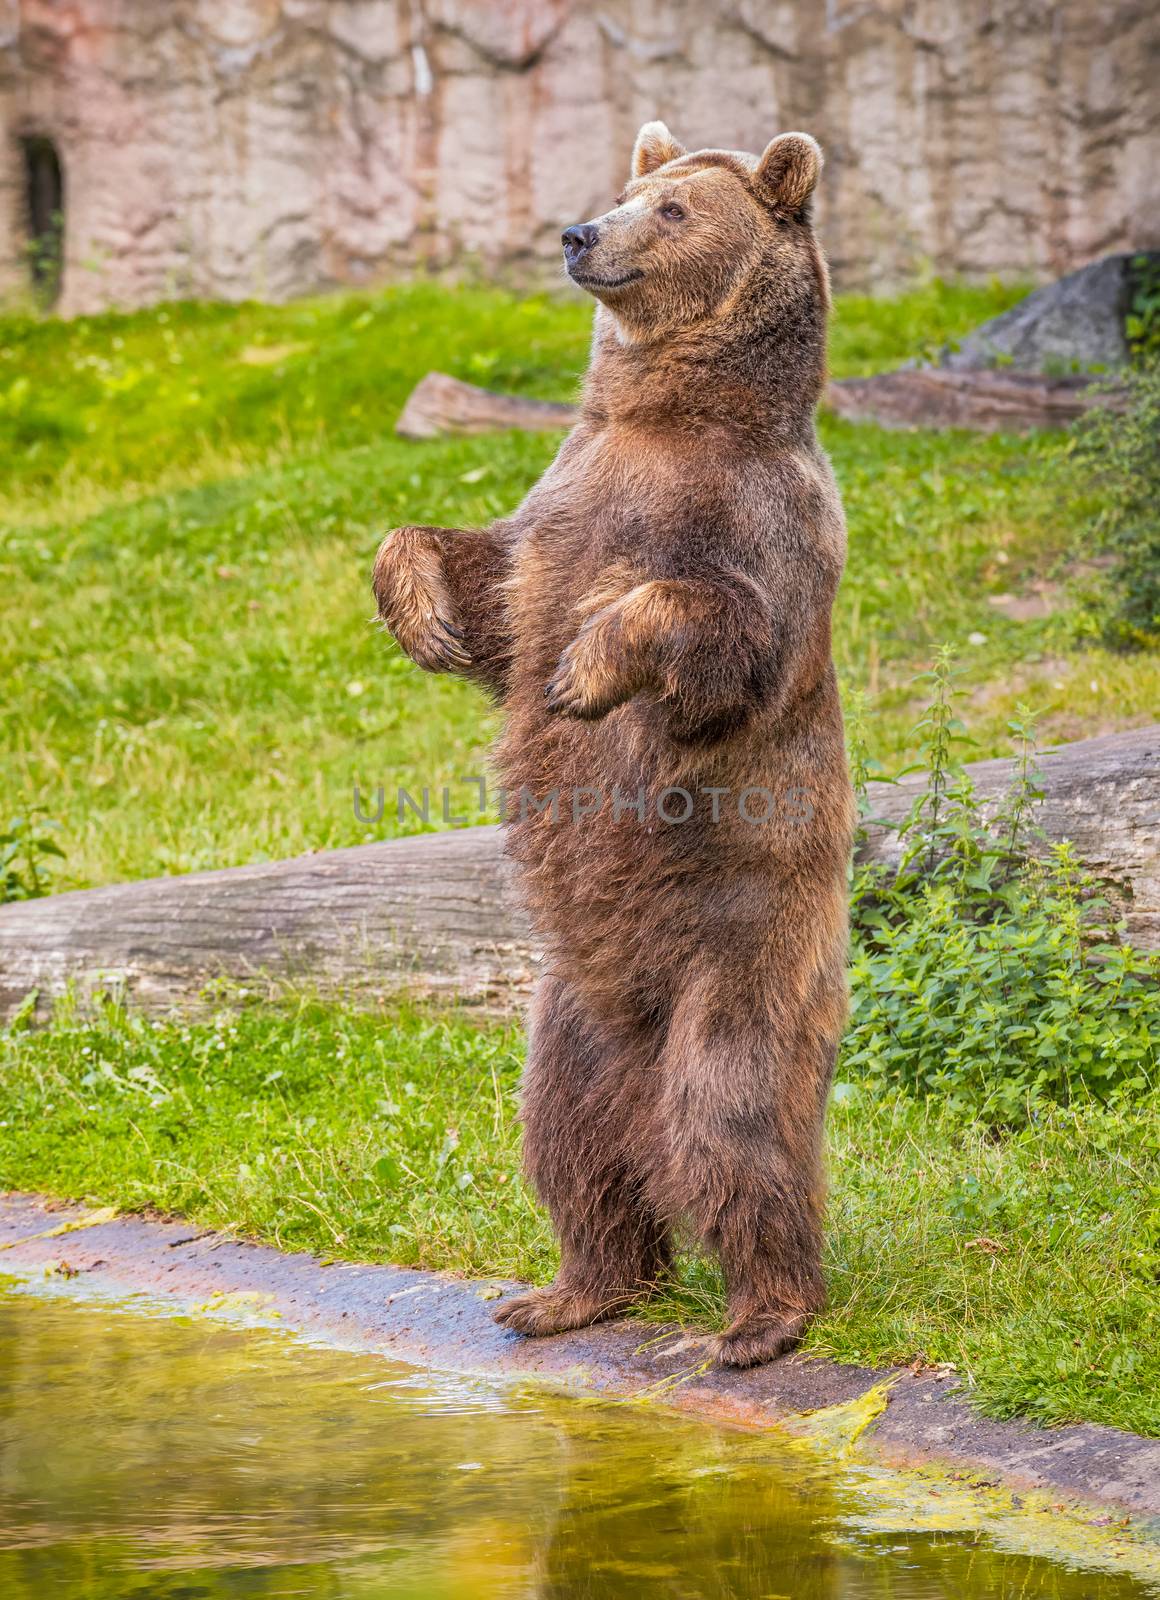 Brown bear also known as Ursus arctos standing on its hind legs.